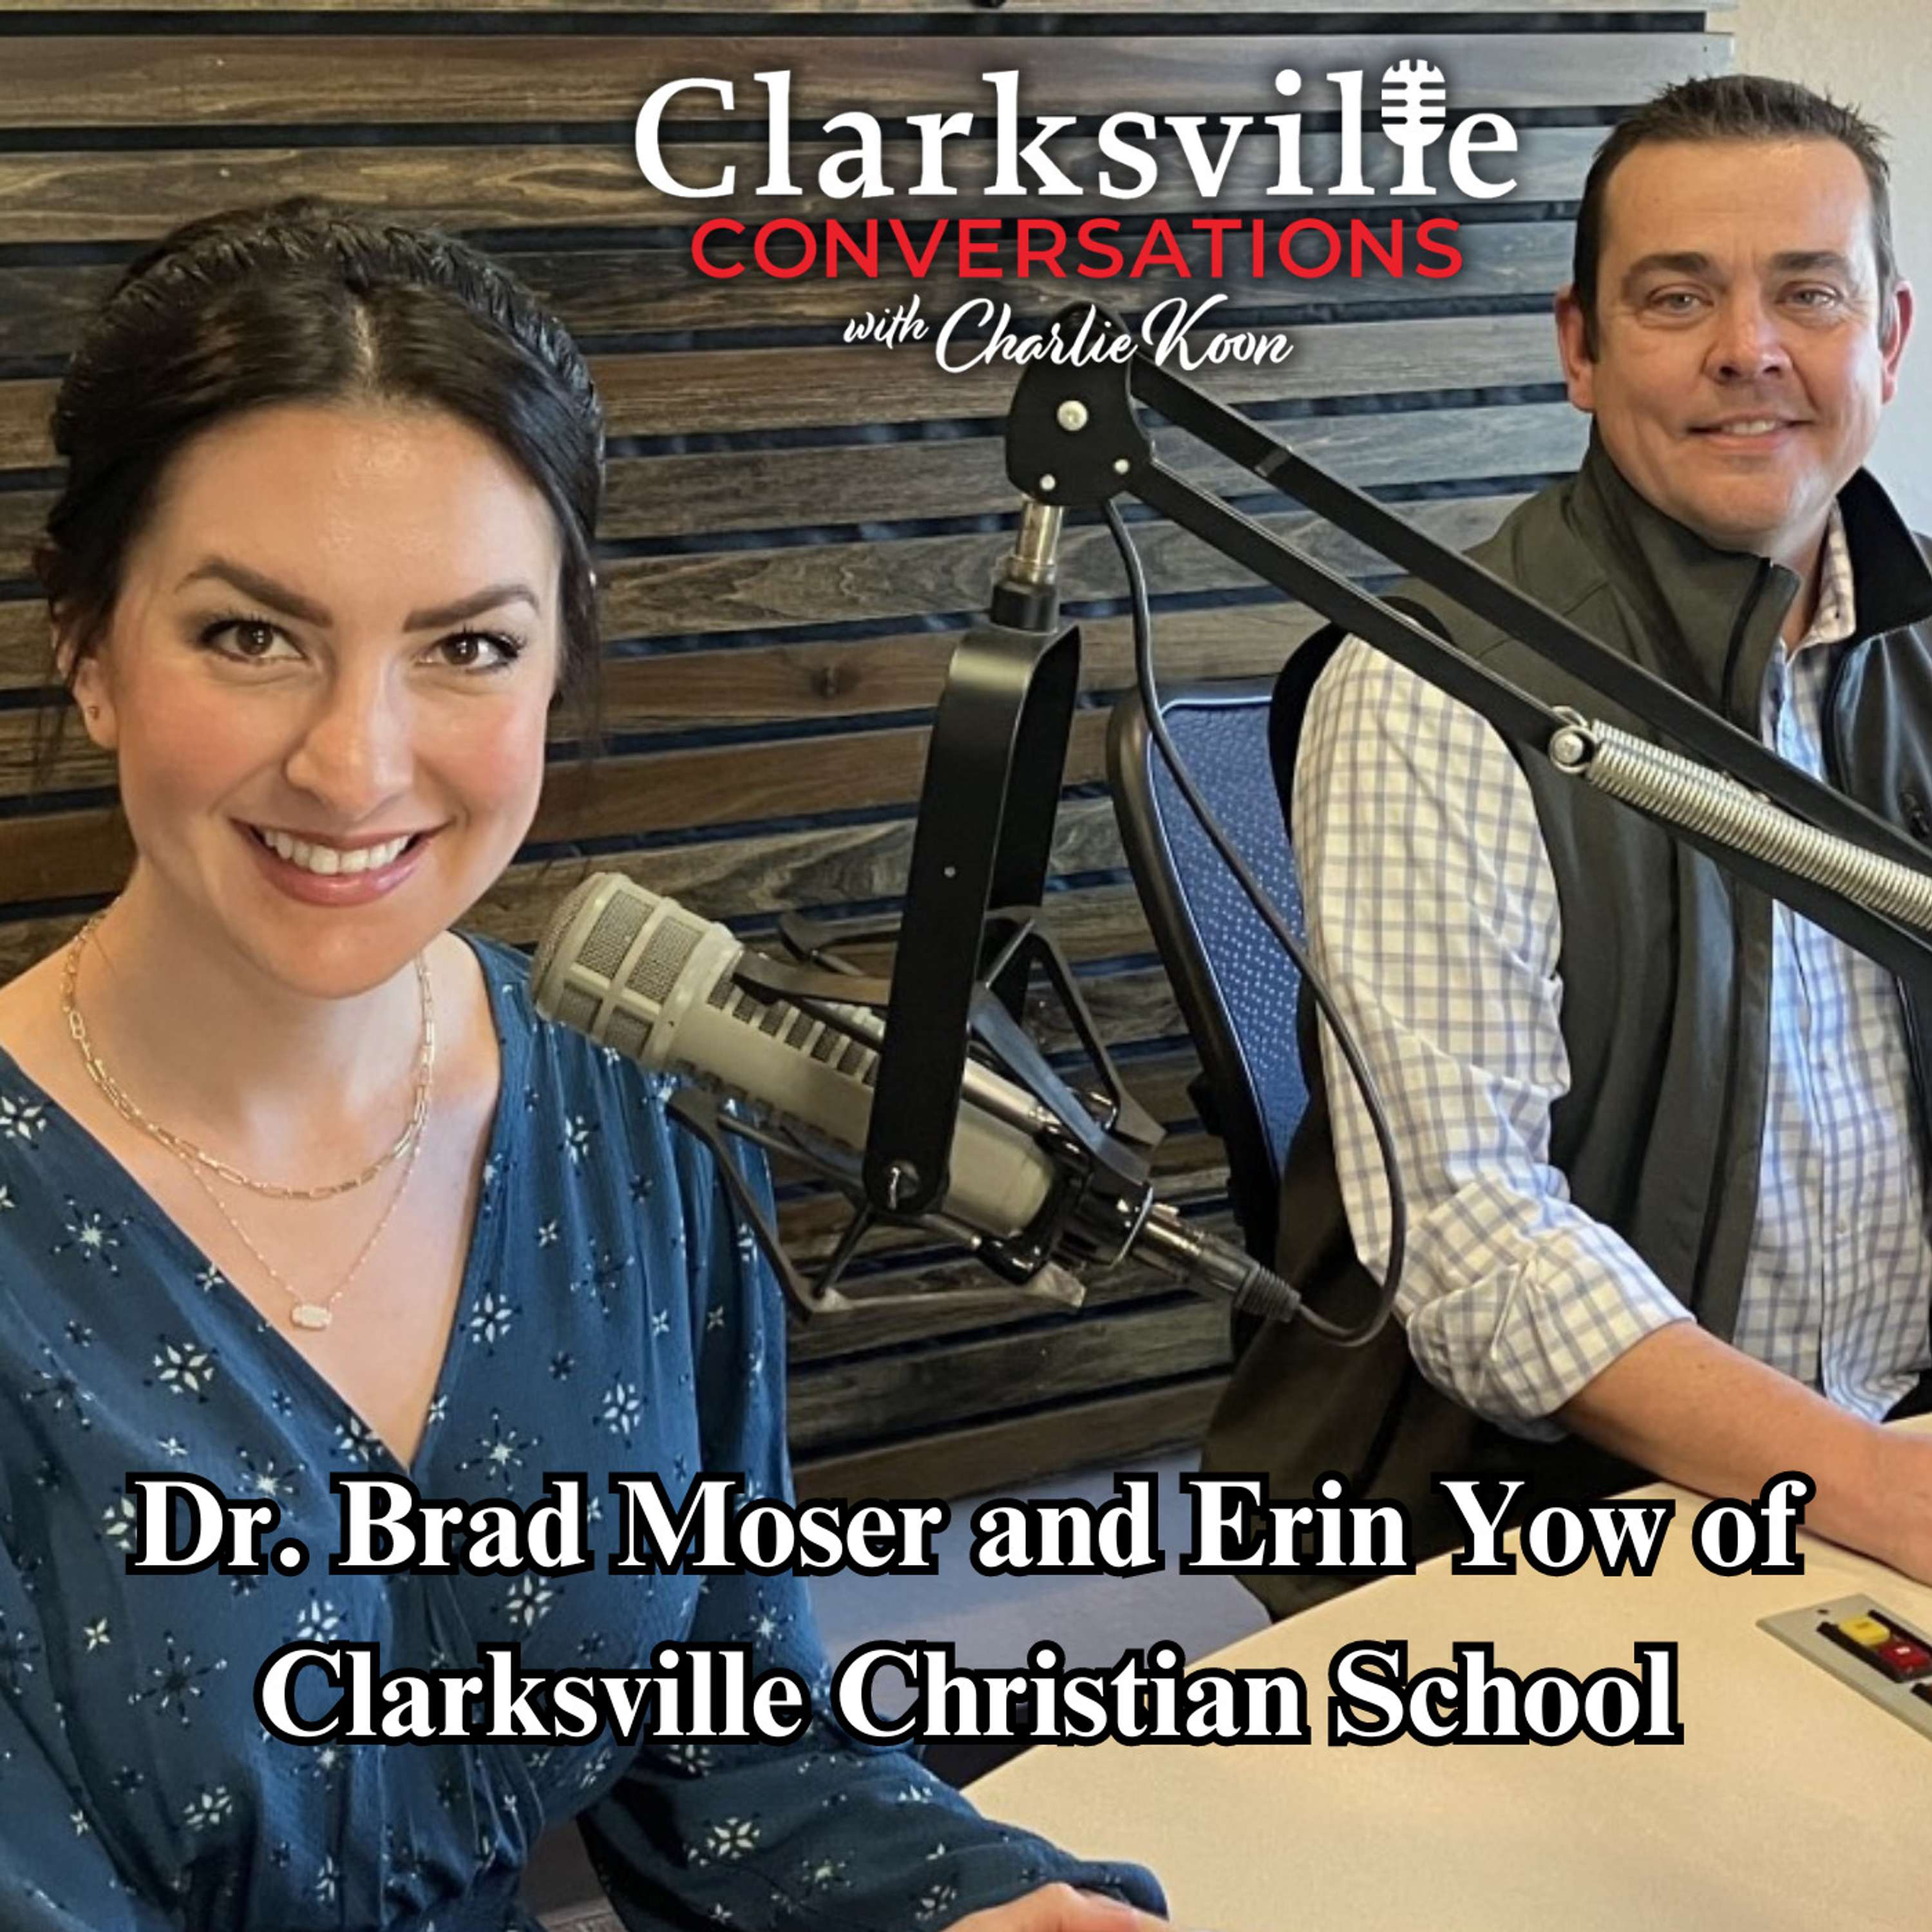 Dr. Brad Moser and Erin Yow of Clarksville Christian School